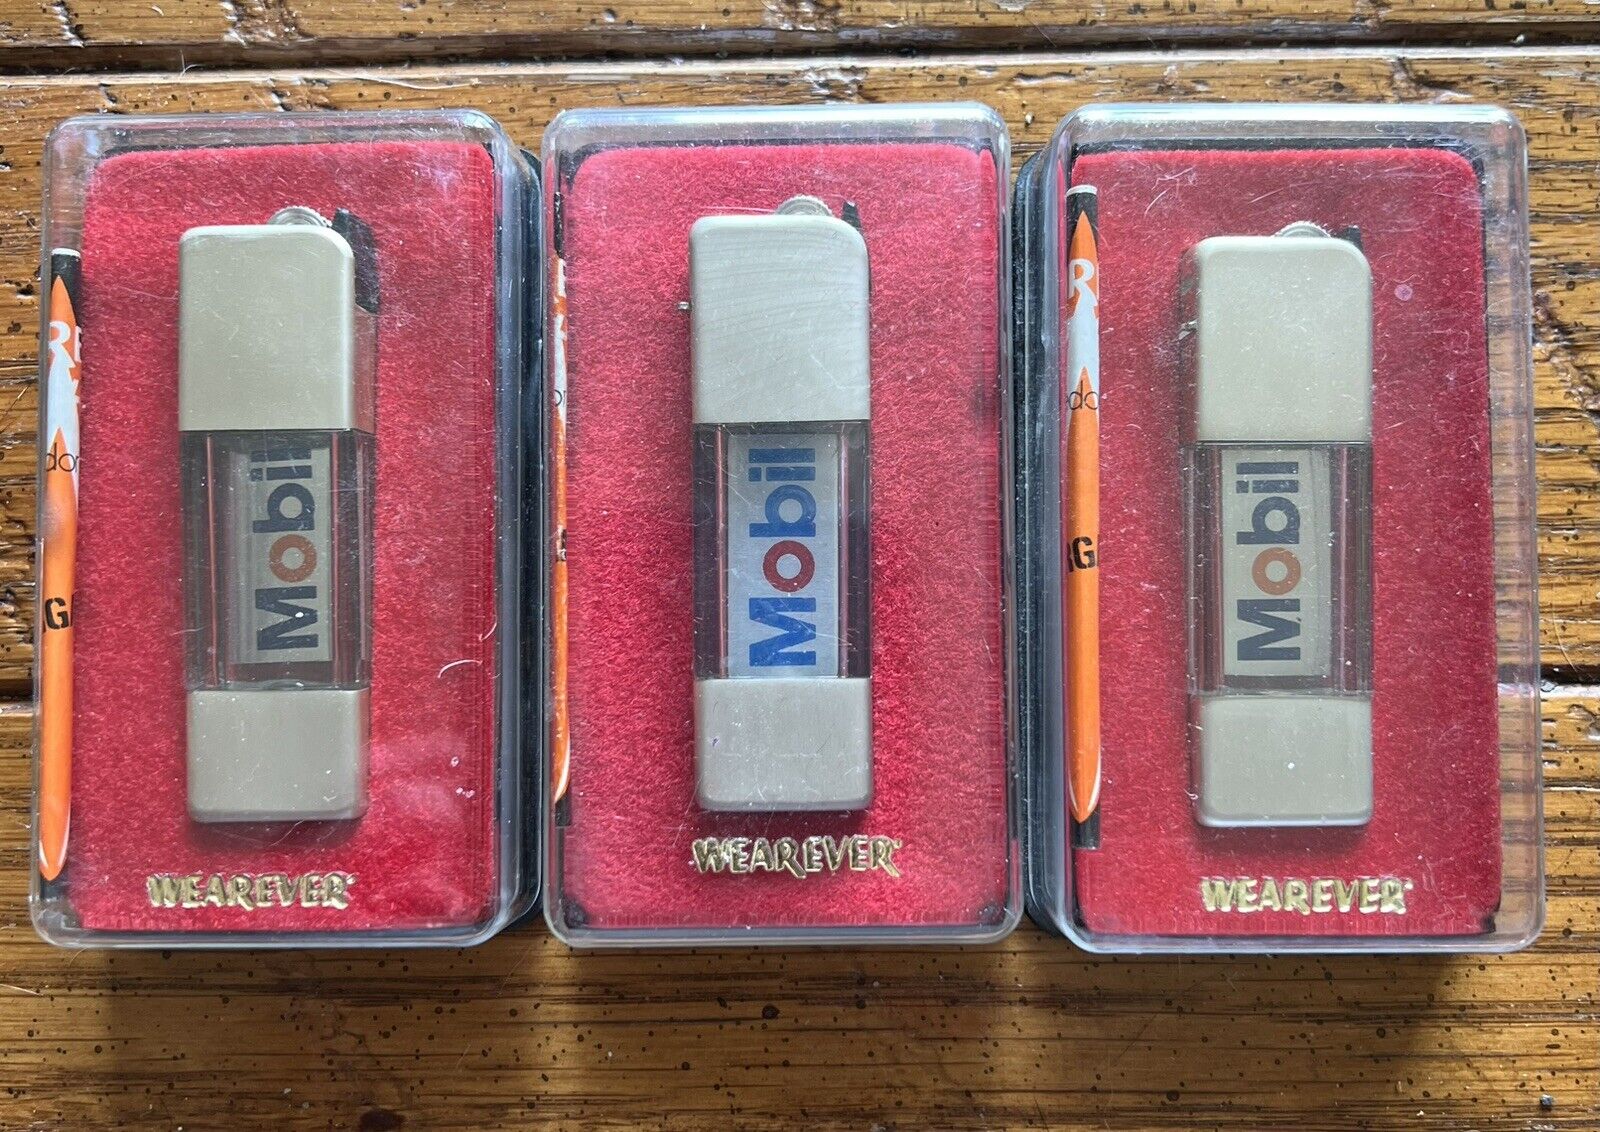 Three (3) Vintage Mobil Oil Gas Lighters. Identical New Old Stock (NOS).